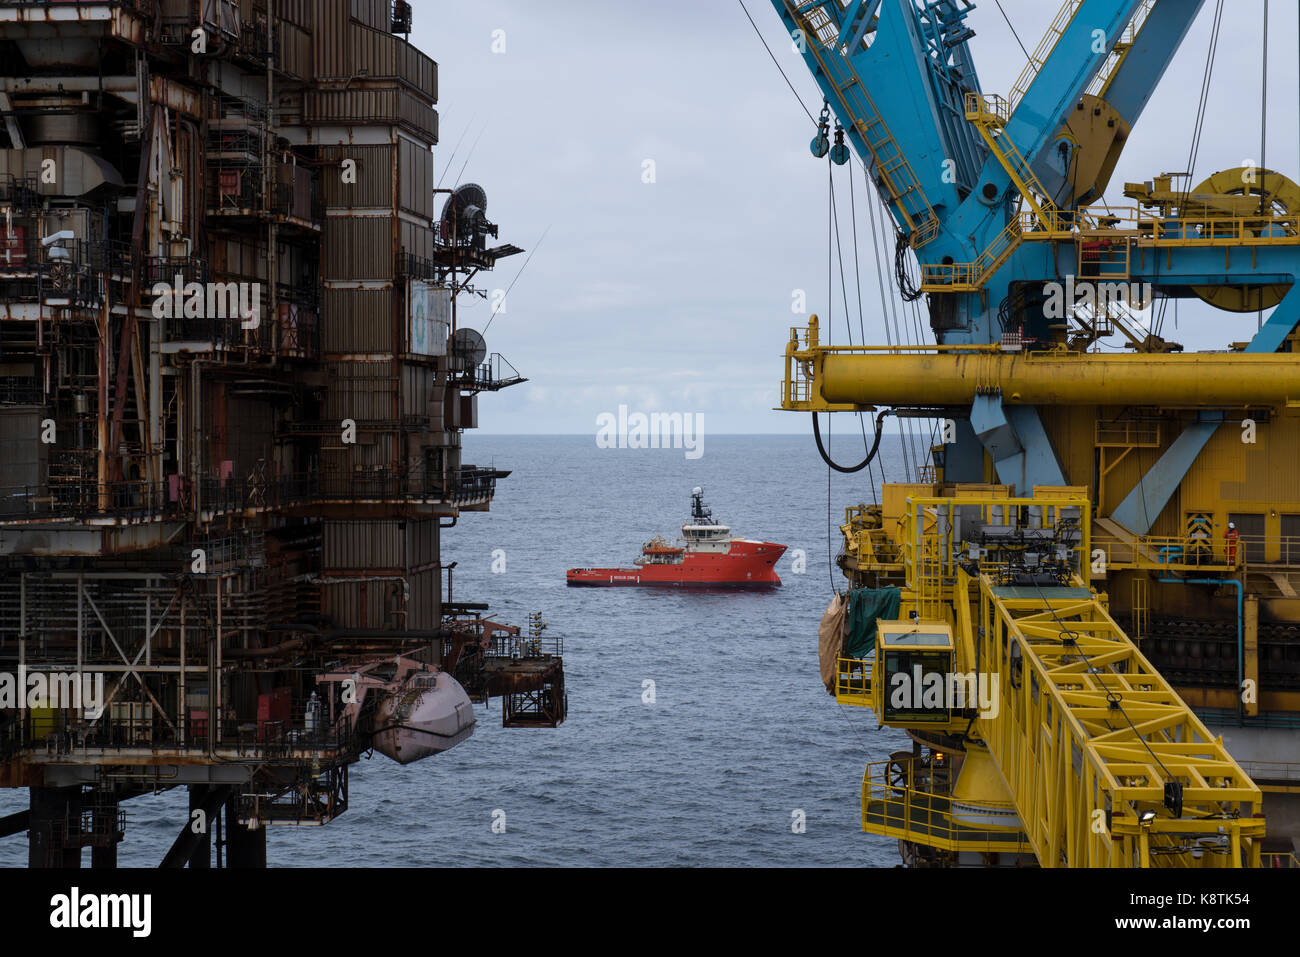 The Grampian Dee Standby vessel serving a North Sea oil and gas rig. credit: LEE RAMSDEN / ALAMY Stock Photo